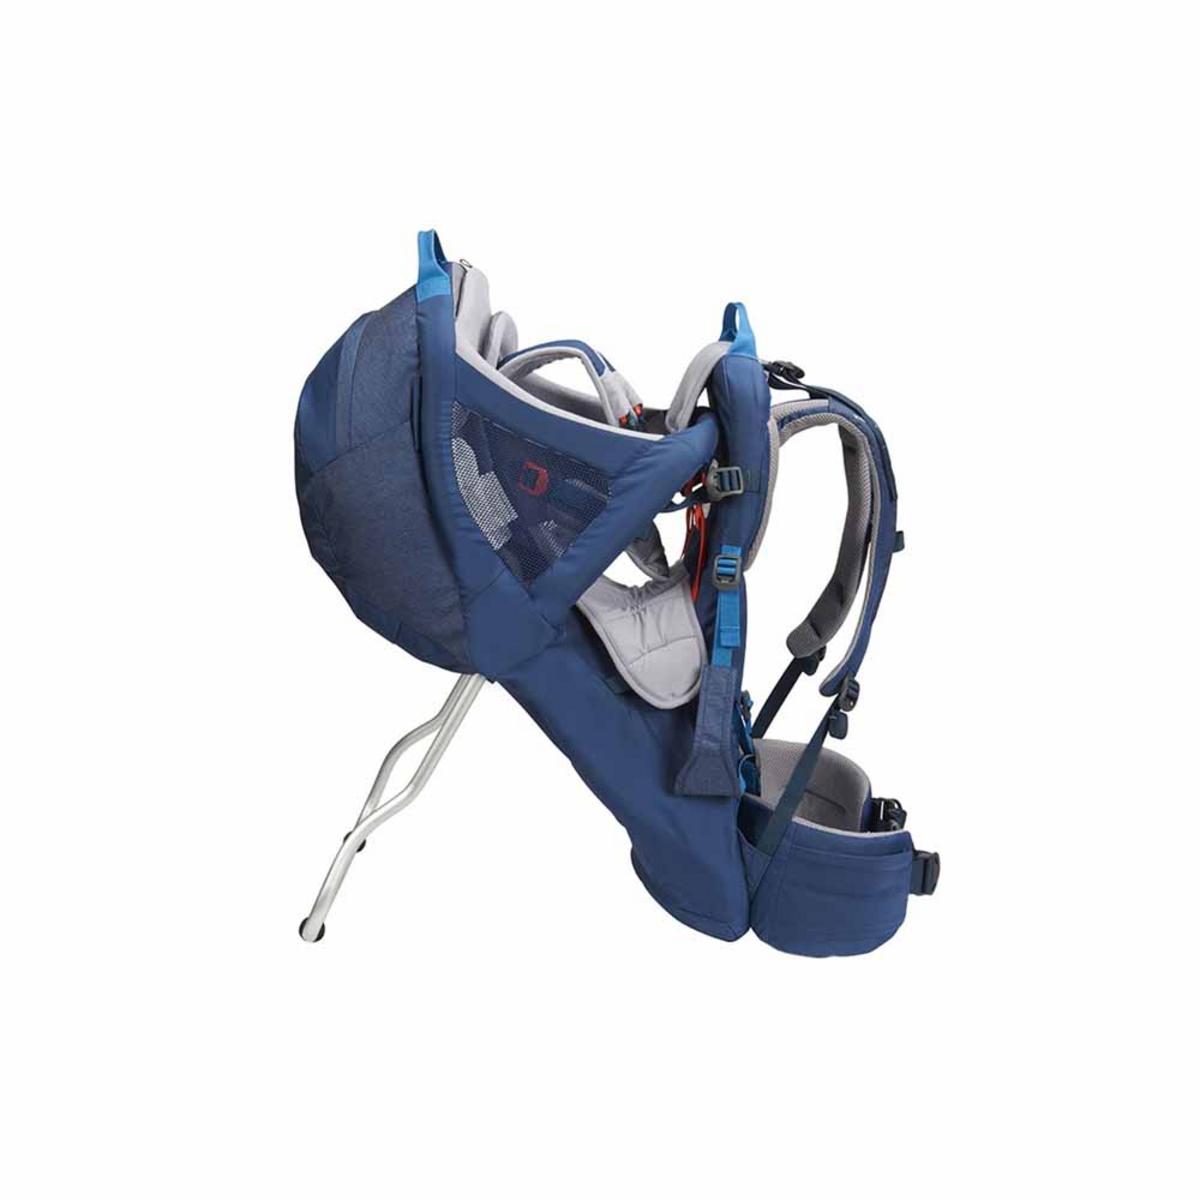 Kelty Journey Perfect Fit Child Carrier